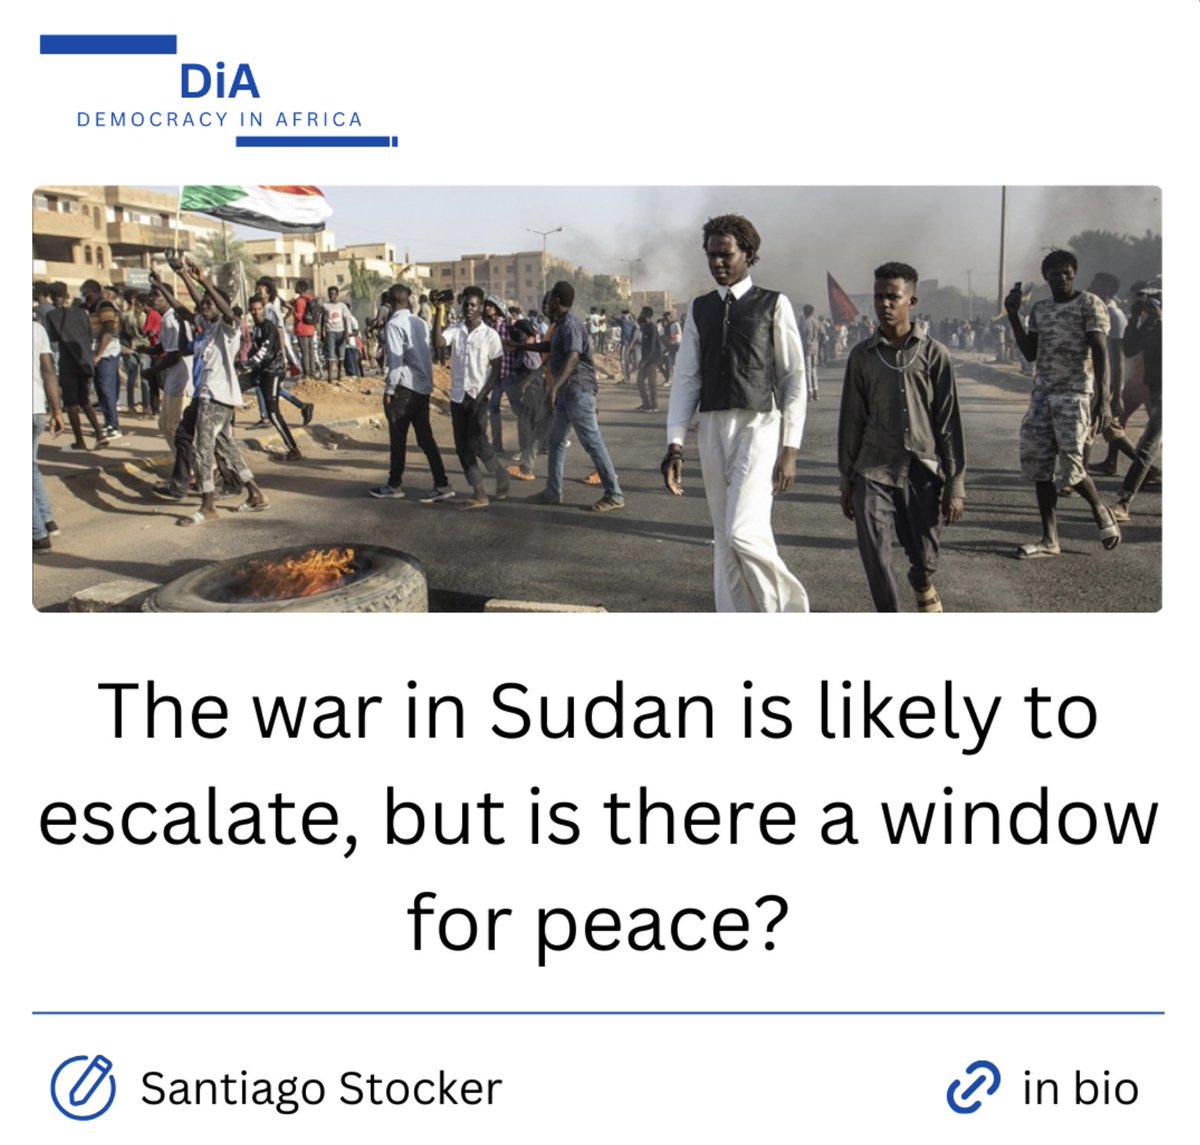 Sudan teeters on the brink of civil war as armed forces clash. Urgent peacebuilding is imperative amidst historic conflict trends. Yet multiparty involvement and lack of civilian engagement hinder resolution. #Sudan #CivilWar #Peacebuilding t.ly/llWSB